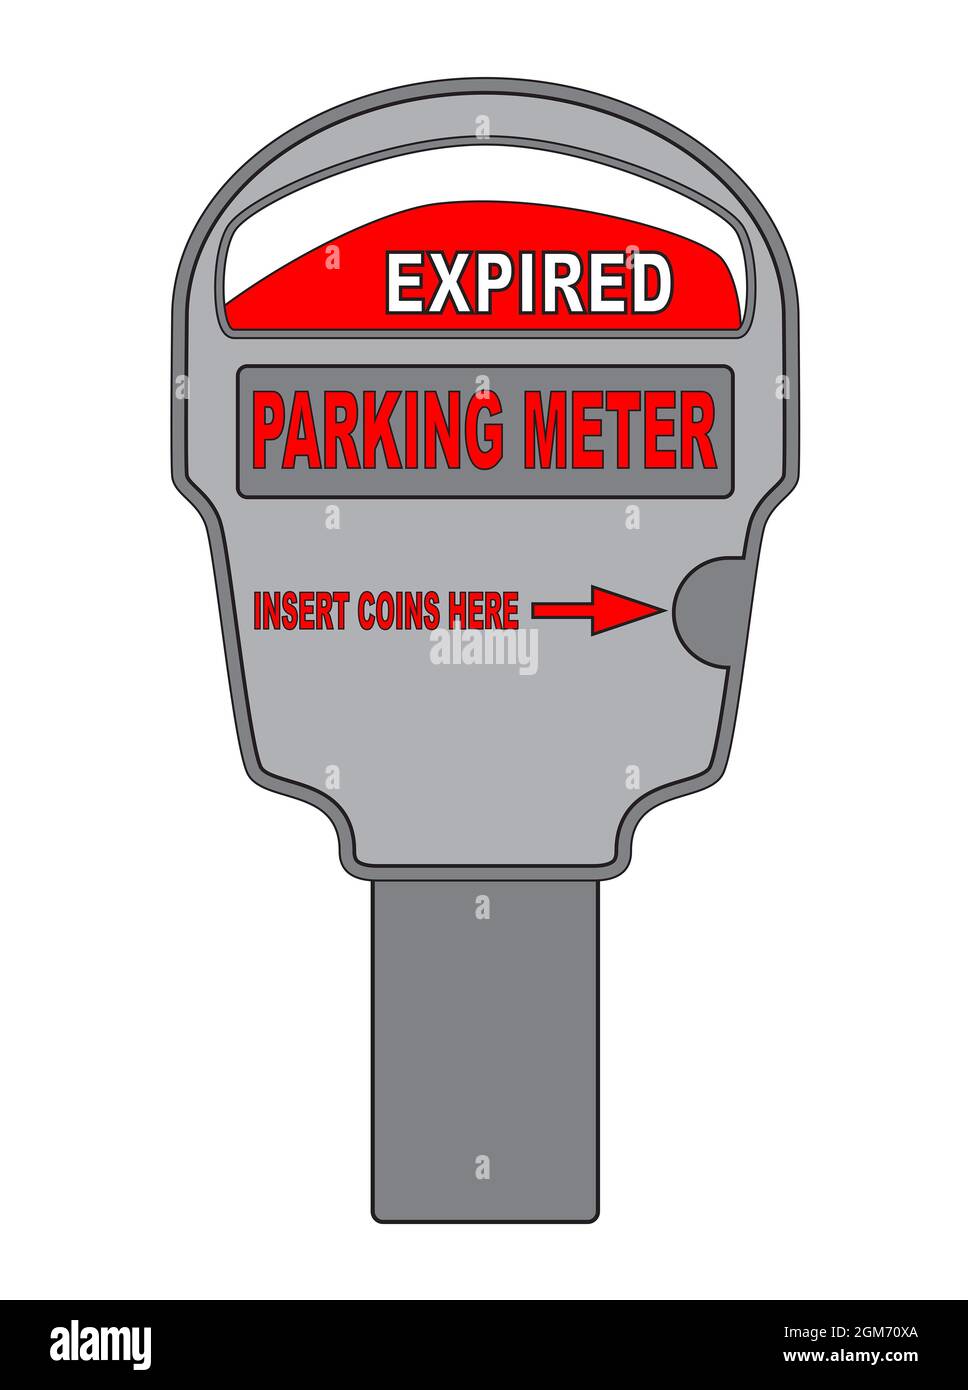 Old style vehicle parking meter displaying a violation expired notice isolated on a white background Stock Photo